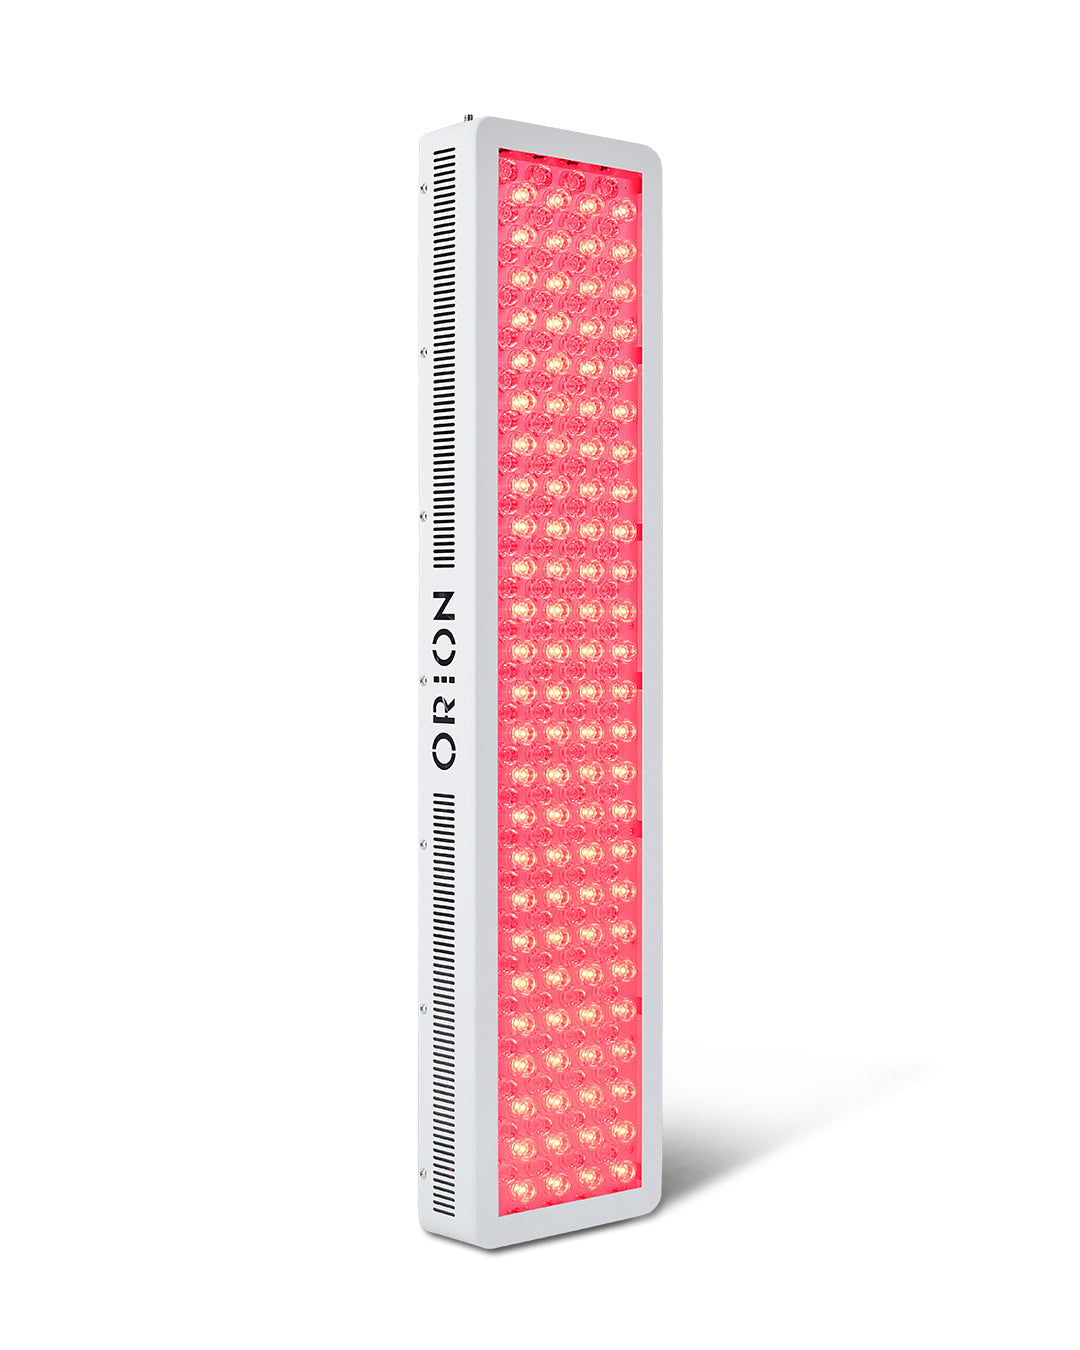 Orion 1000 turned on. Orion Red Light Therapy. LED Light Therapy. Improves Collagen Production. Mitochondria. Muscle Recovery and Performance.